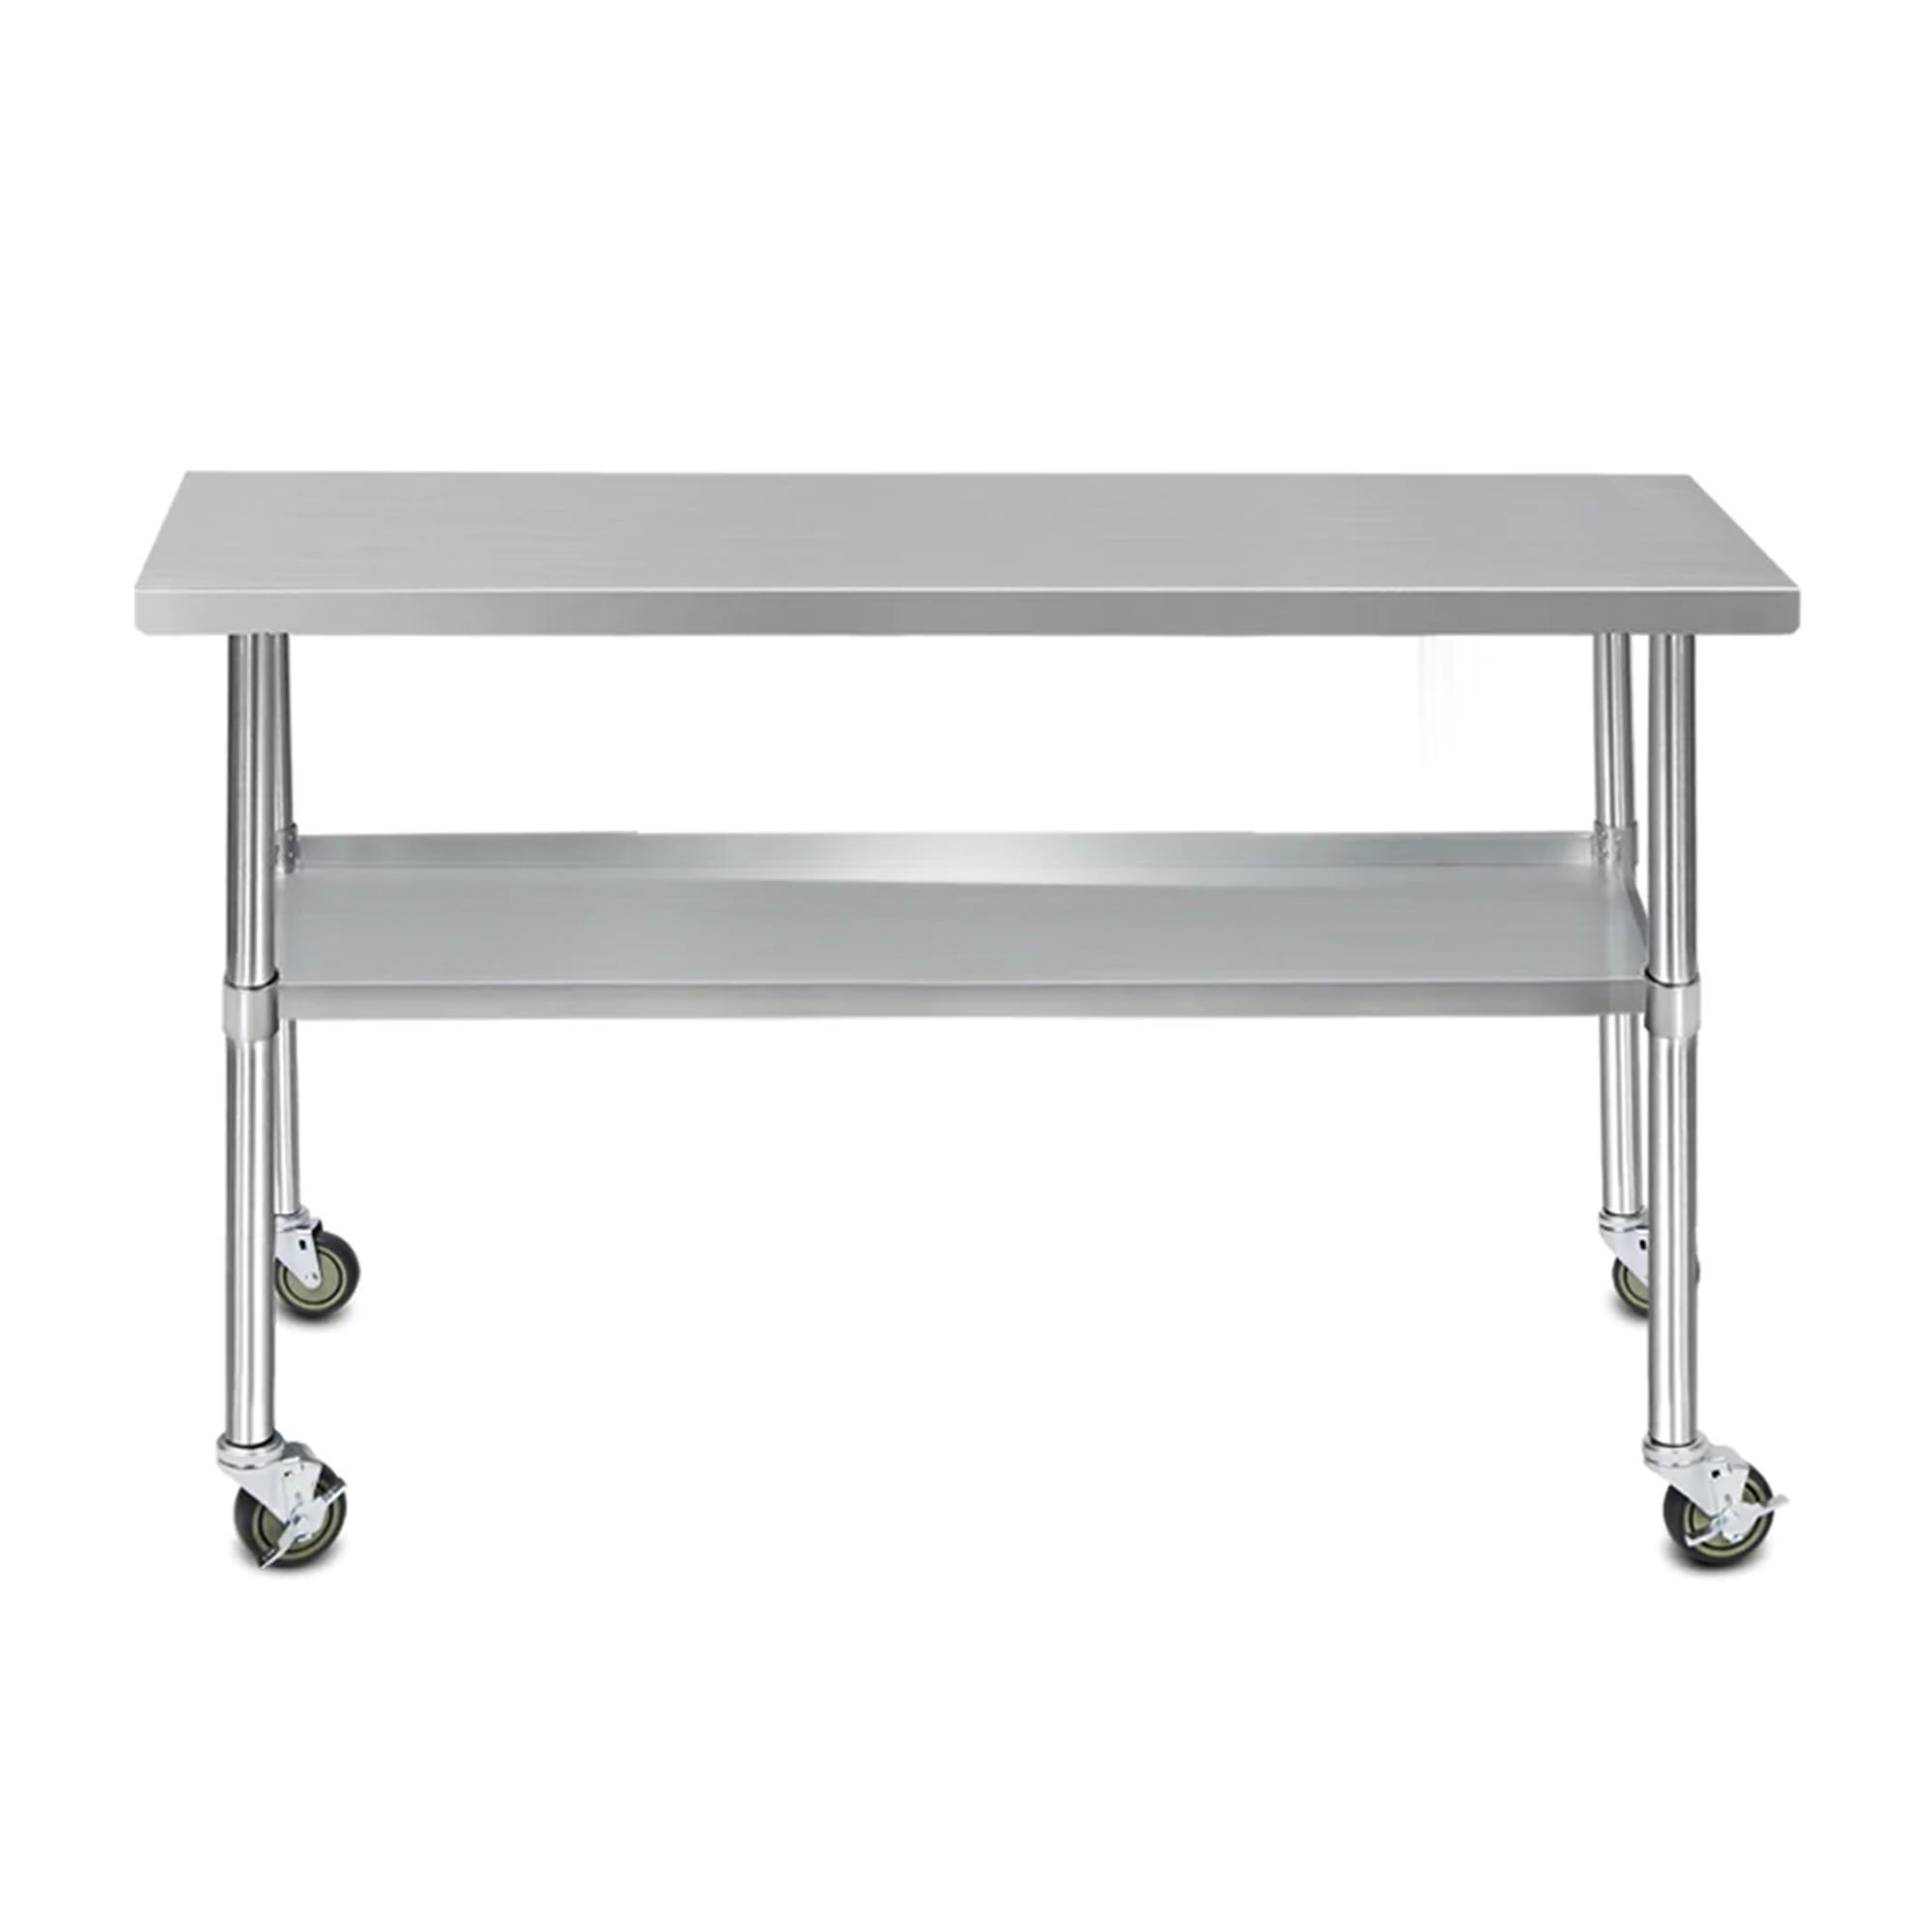 Cefito 430 Stainless Steel Kitchen Bench with Wheels 152.4x61cm Image 2